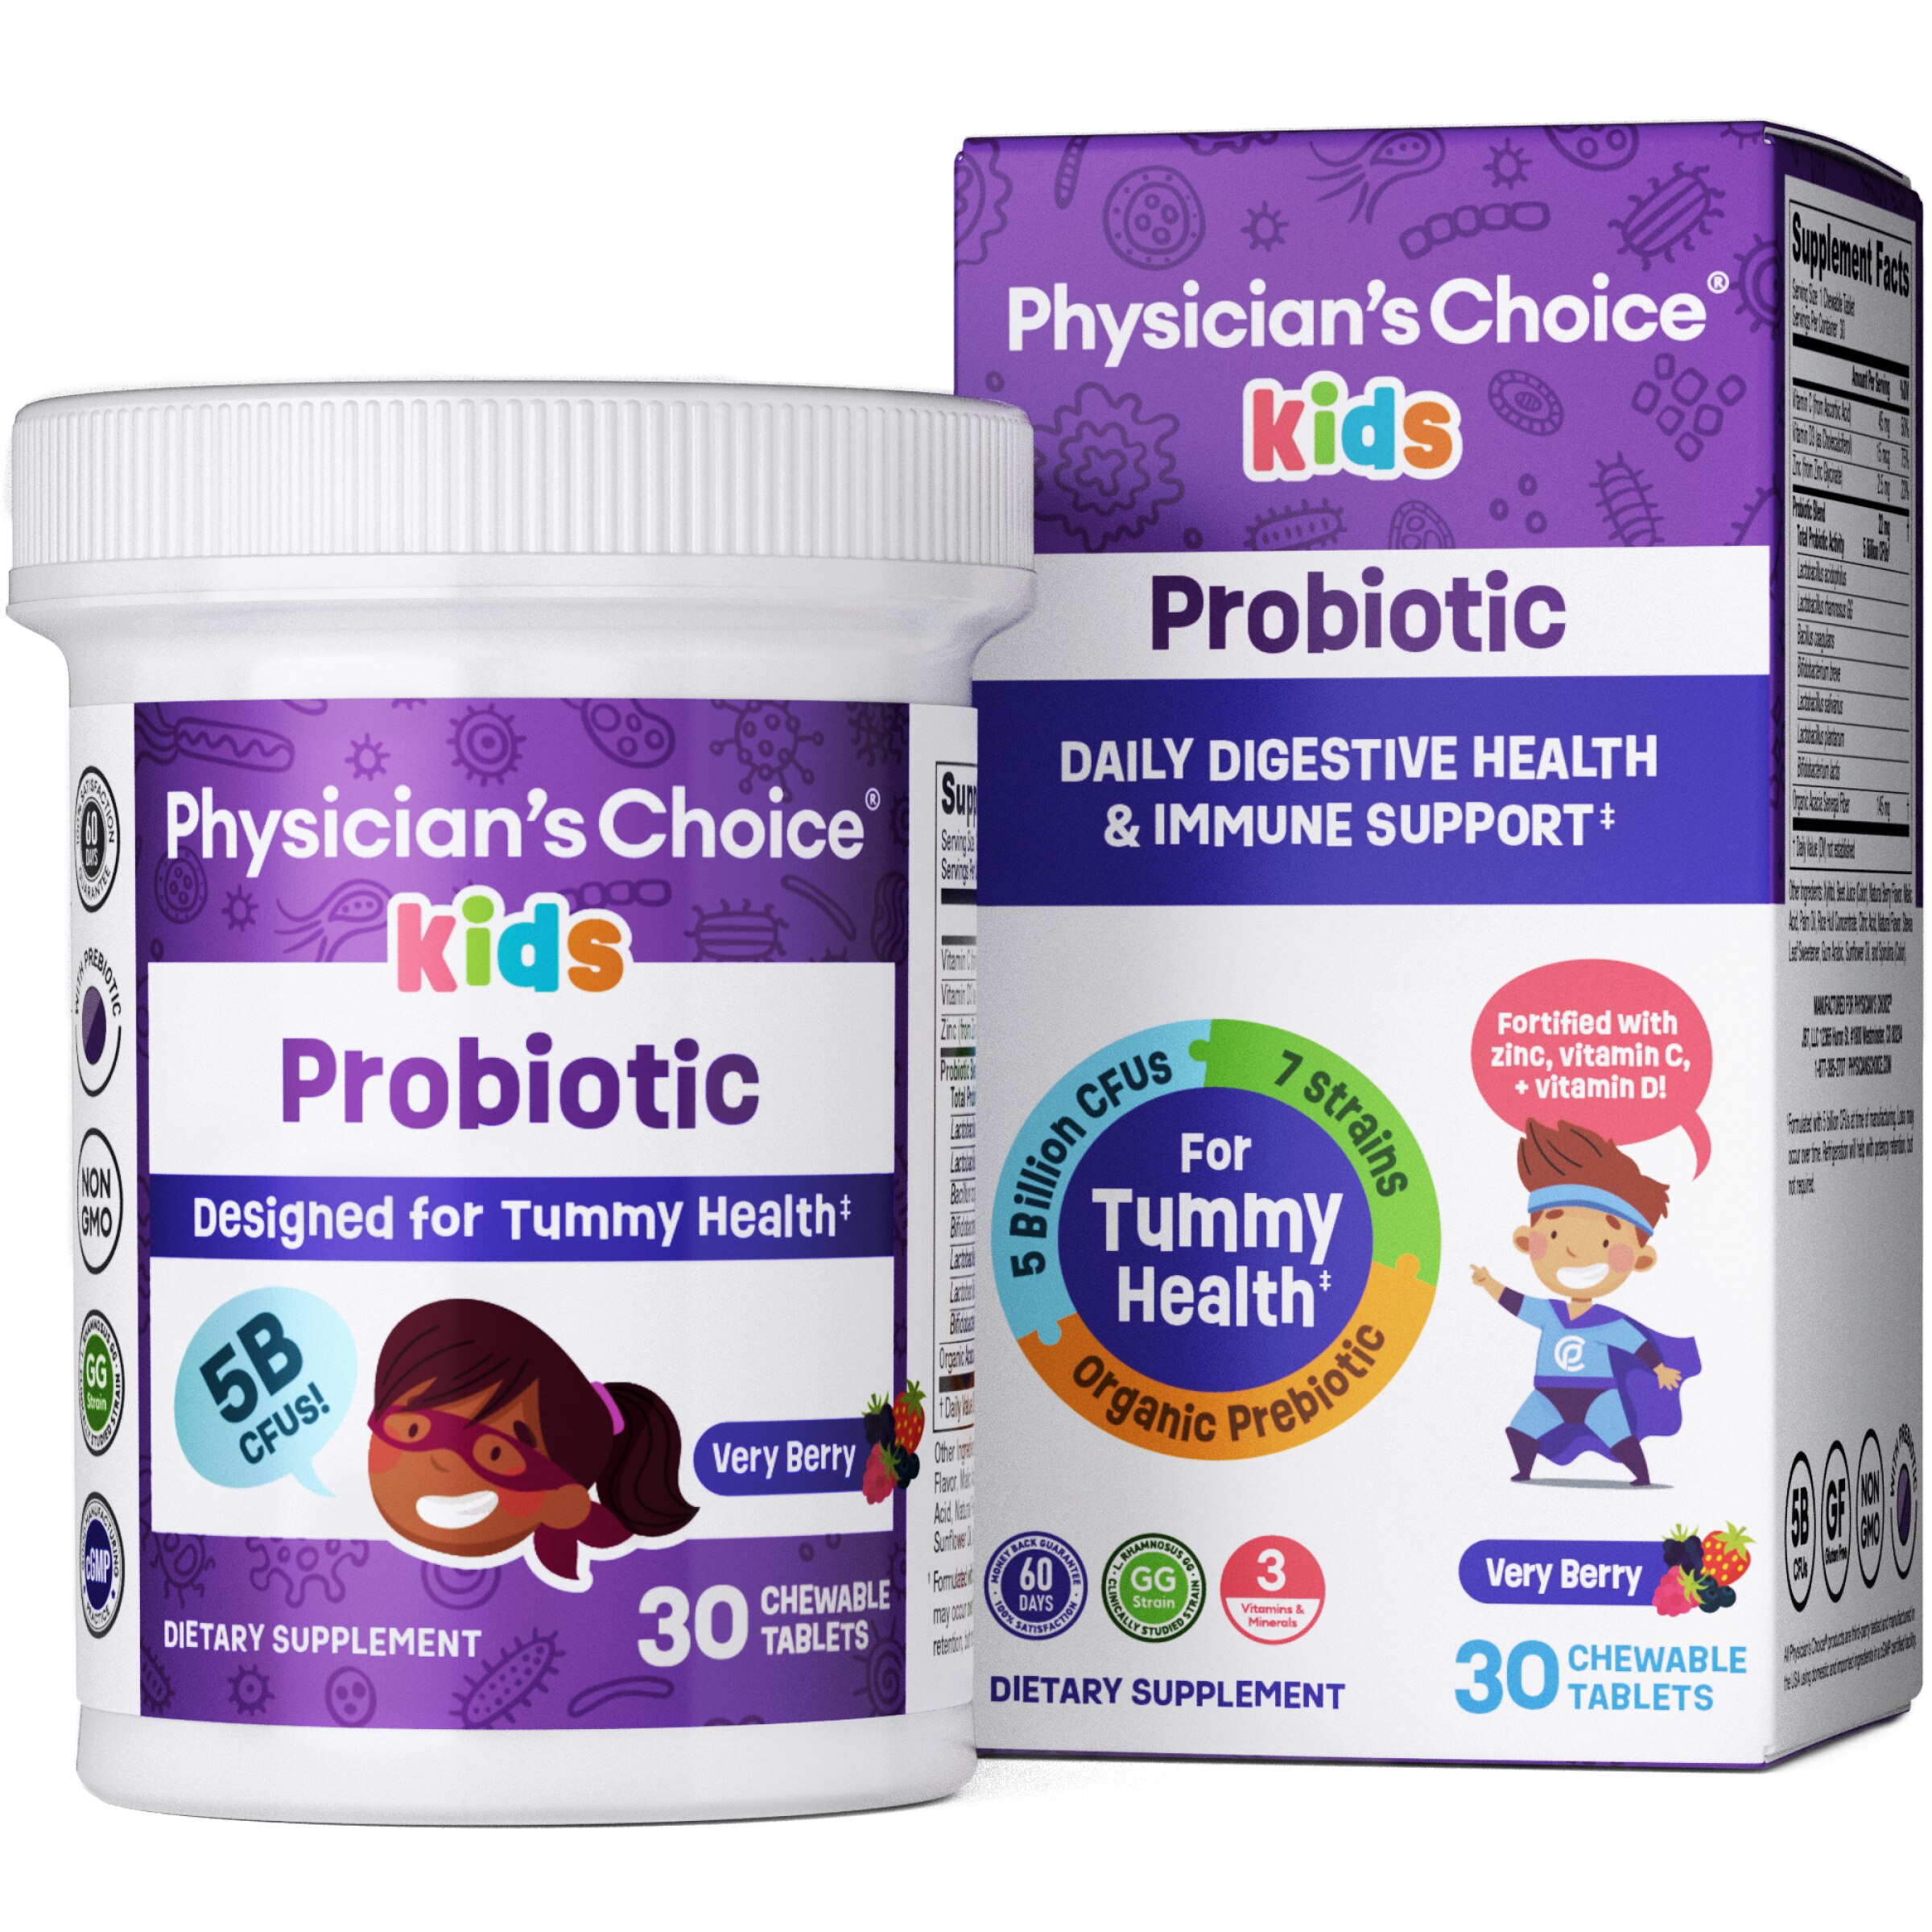 Physician's Choice Kids Probiotic Chewable, Very Berry, 30 CT